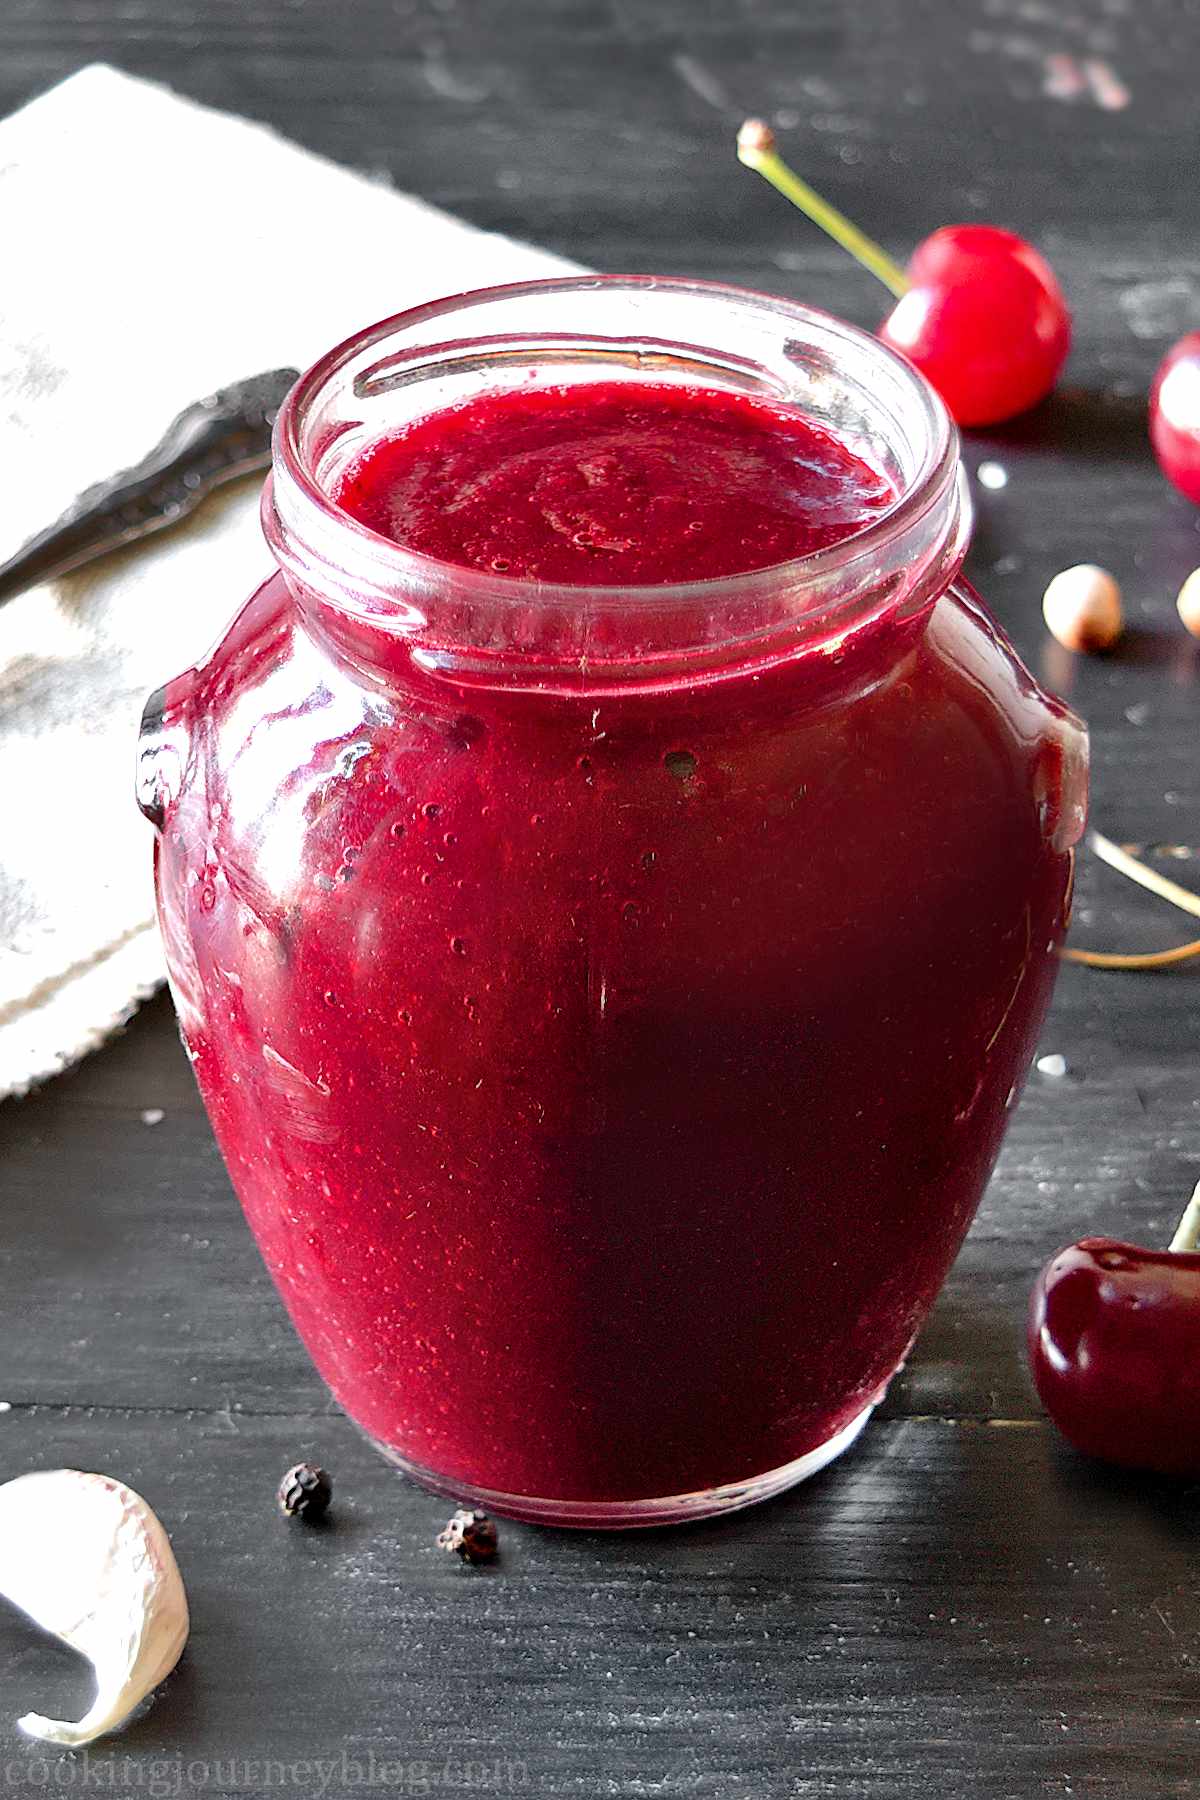 Savory cherry sauce in a jar with fresh cherries on the black table